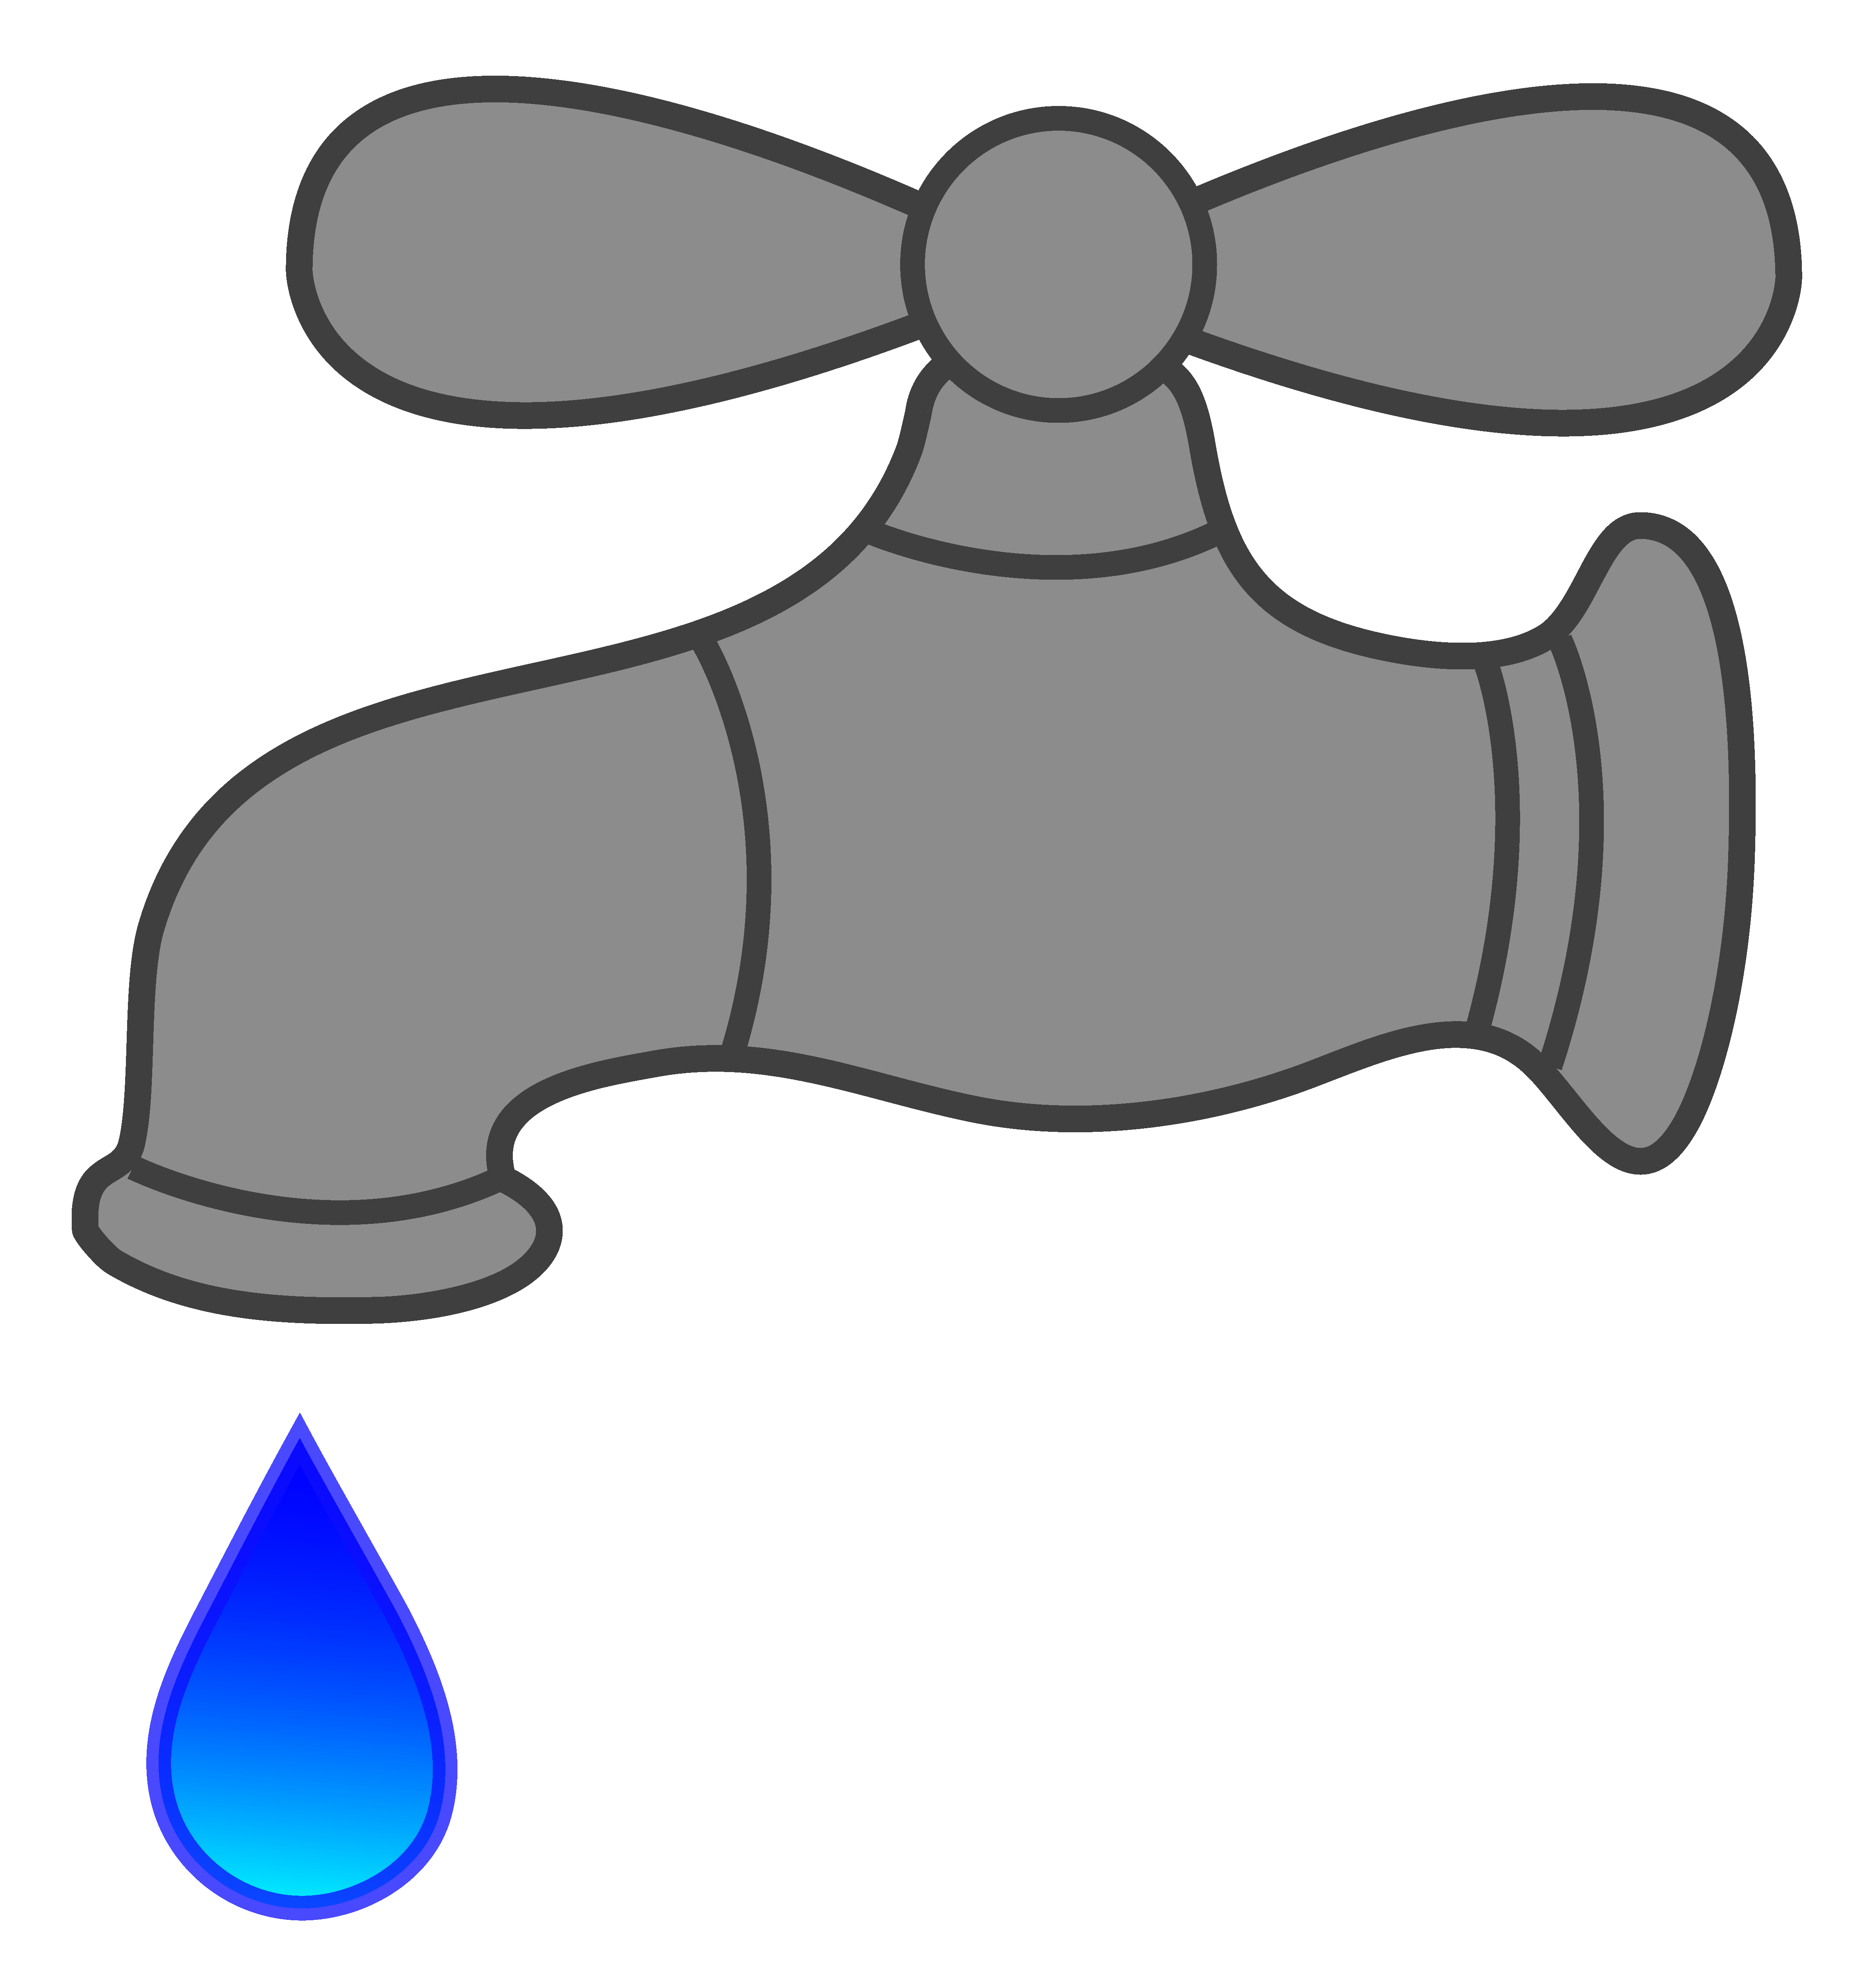 Pipe clipart leak. Images of a drinking